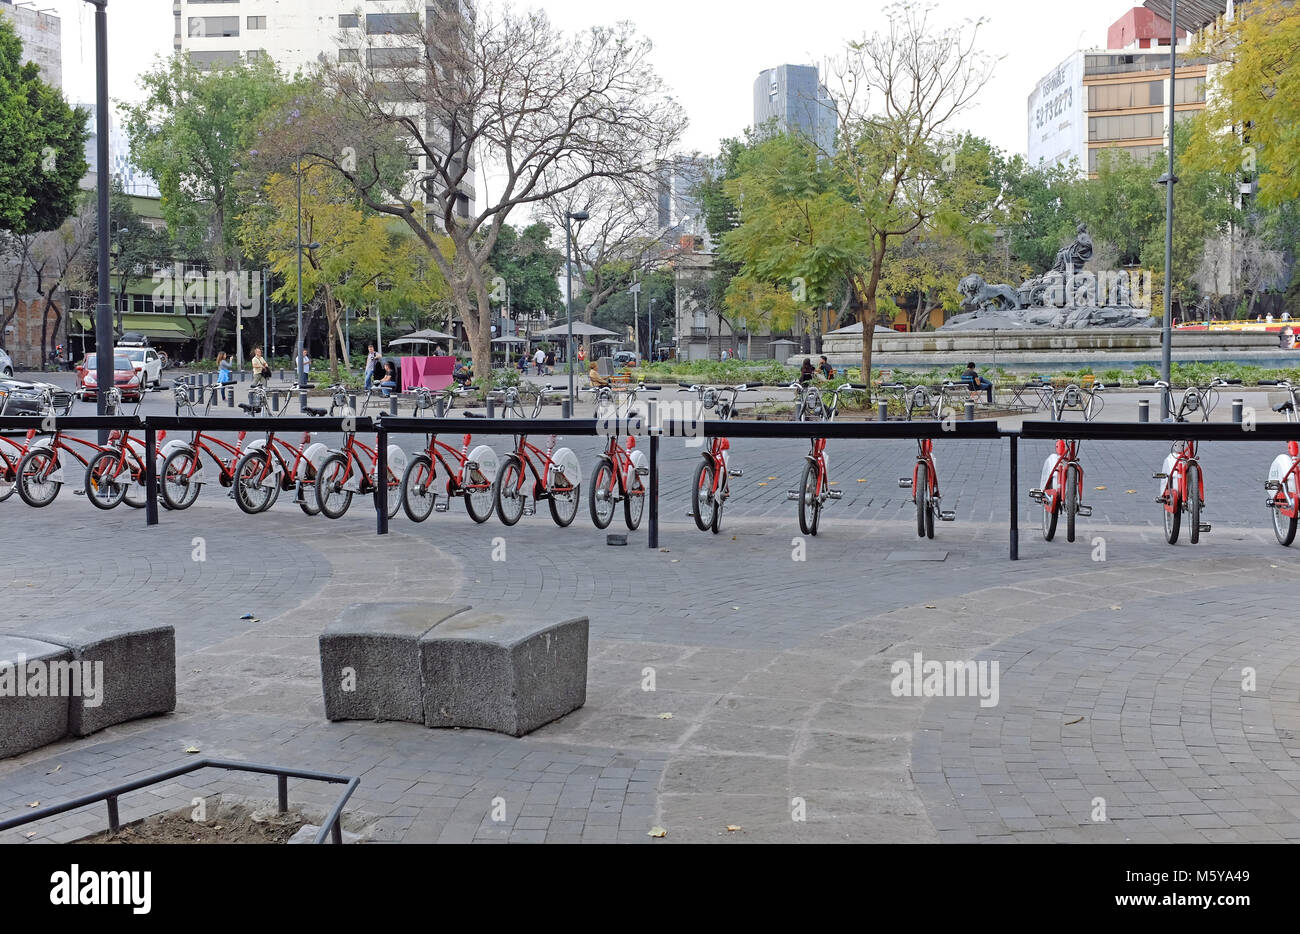 Launched in 2010 in Mexico City, Mexico, the private-public partnership for sustainable transport via the EcoBici bike sharing program expands. Stock Photo